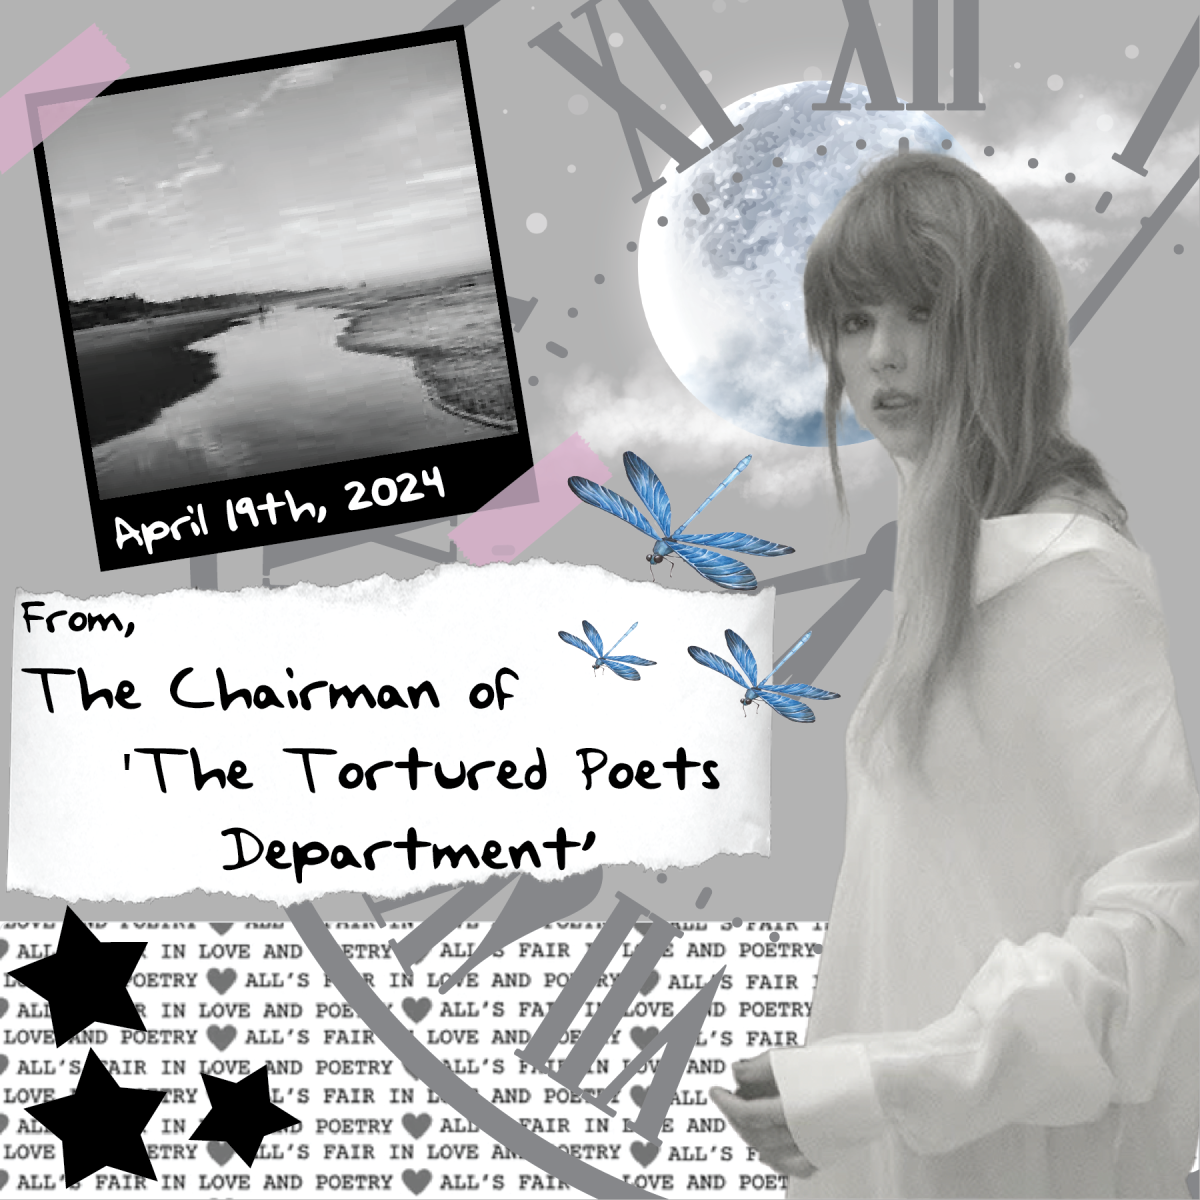 Difference+of+Opinion%3A+The+Tortured+Poets+Department+review